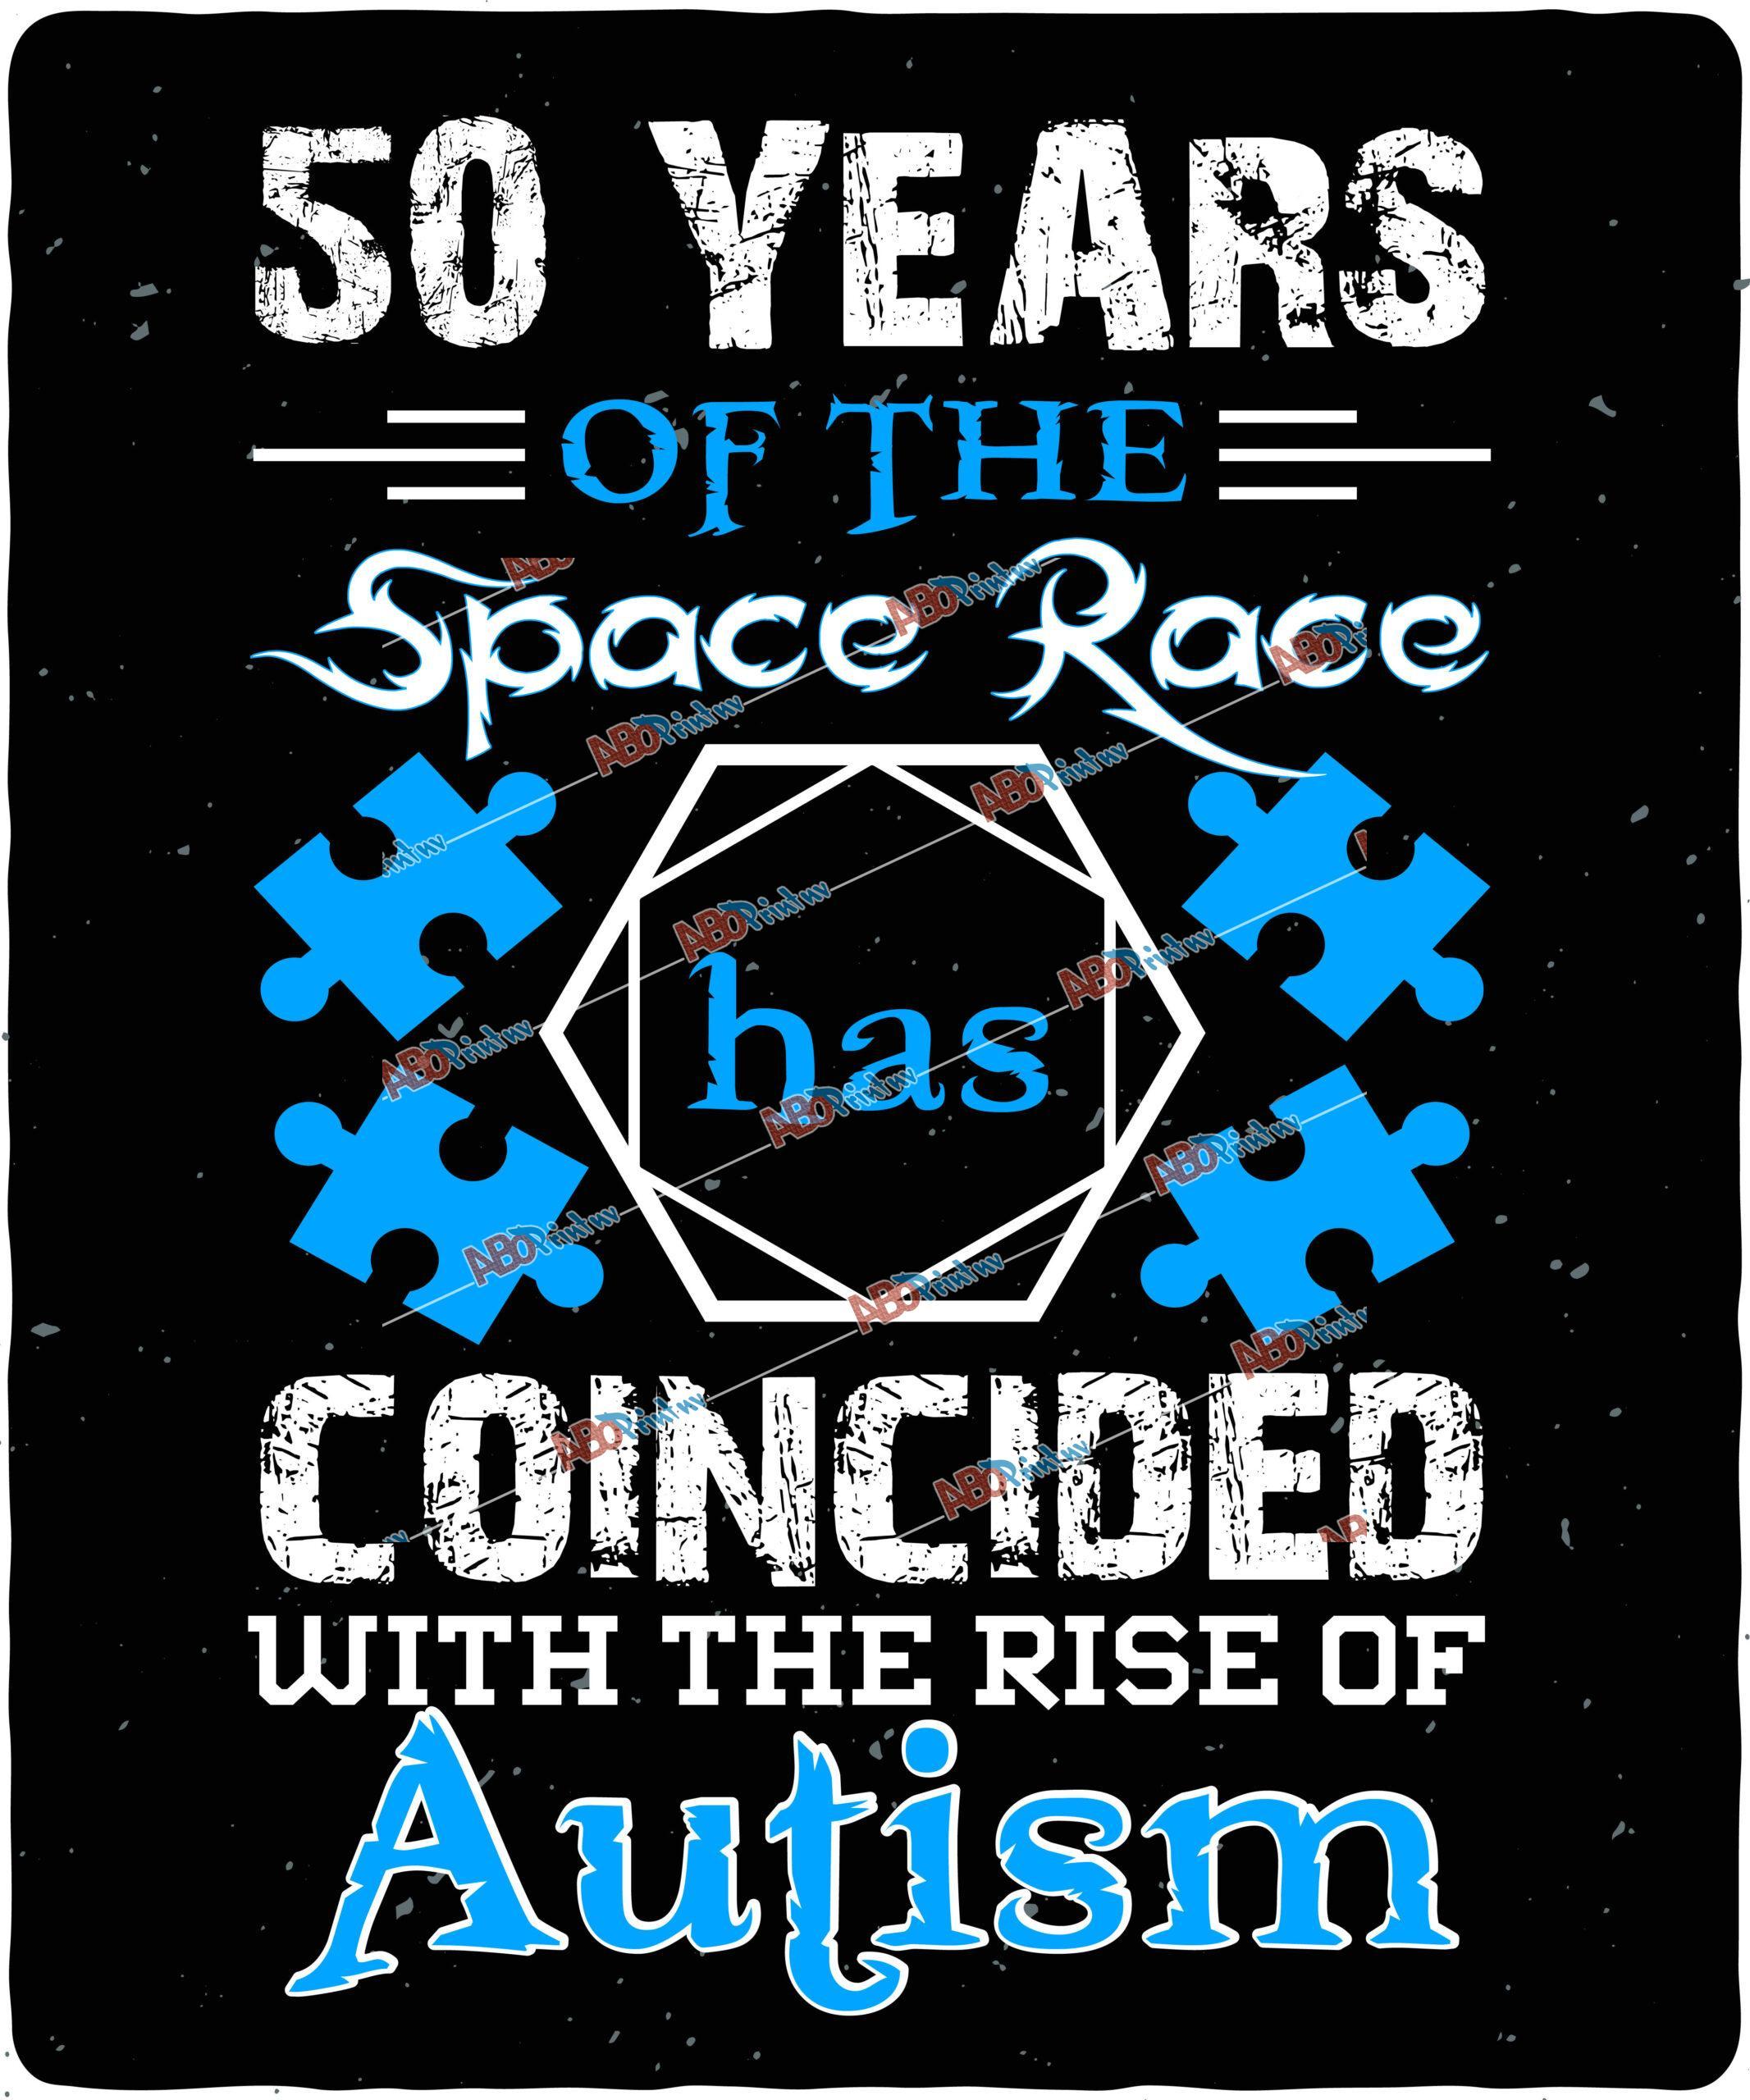 50 years of the Space Race has coincided with the rise of Autism